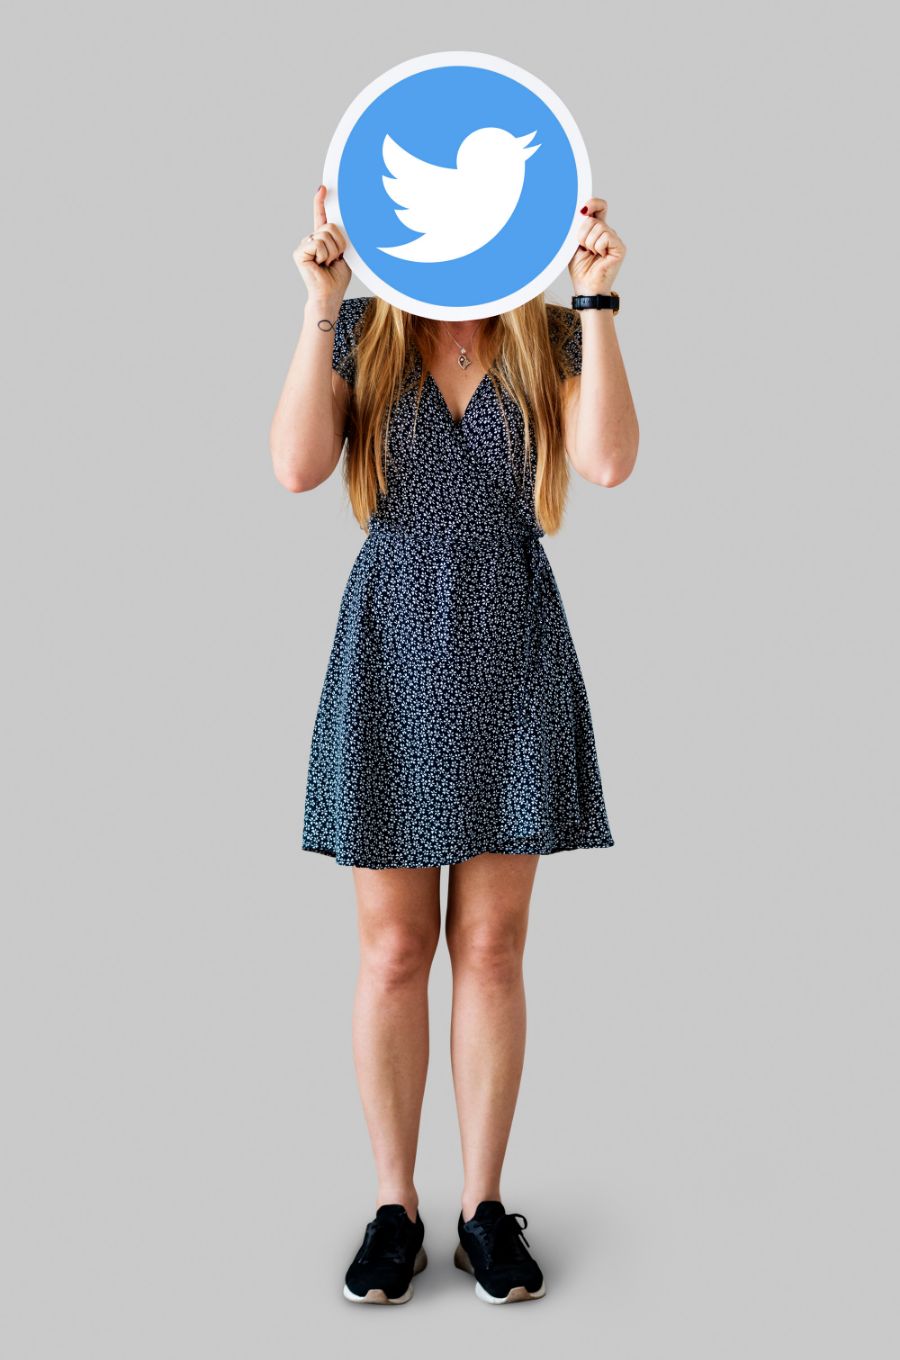 How to Leverage Twitter for Small Business Marketing